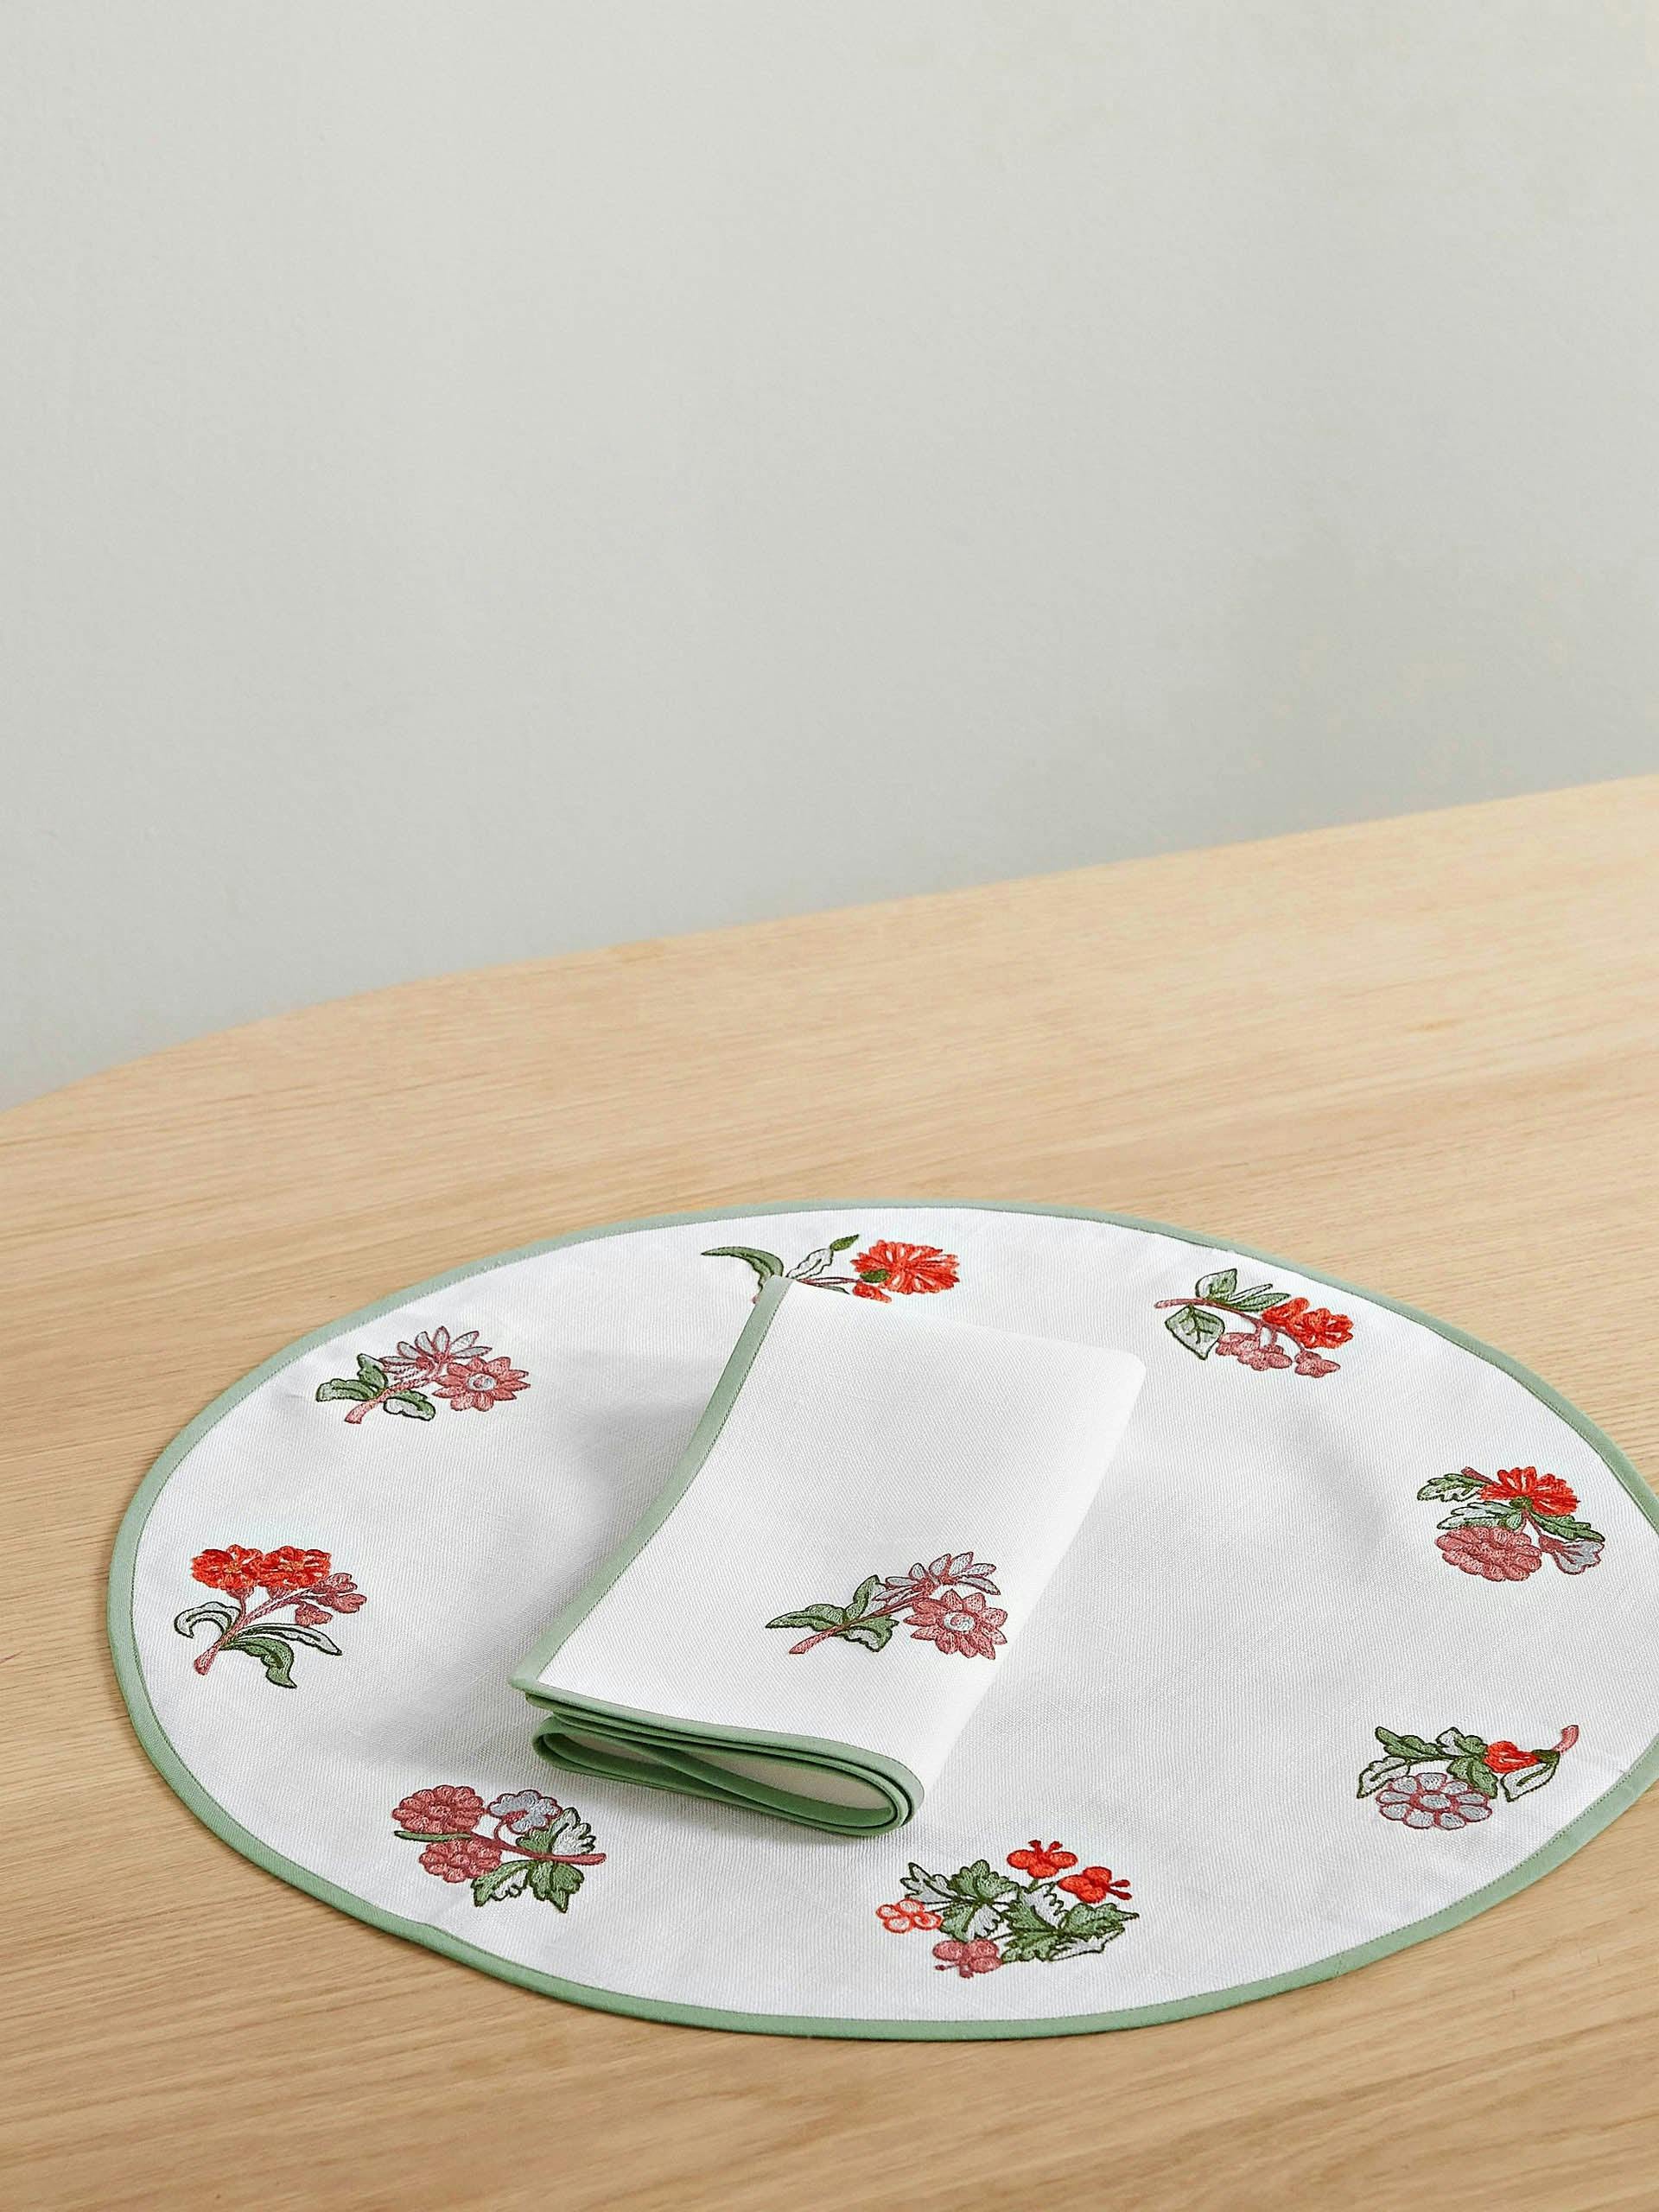 Floral embroidered linen placemat and napkin set